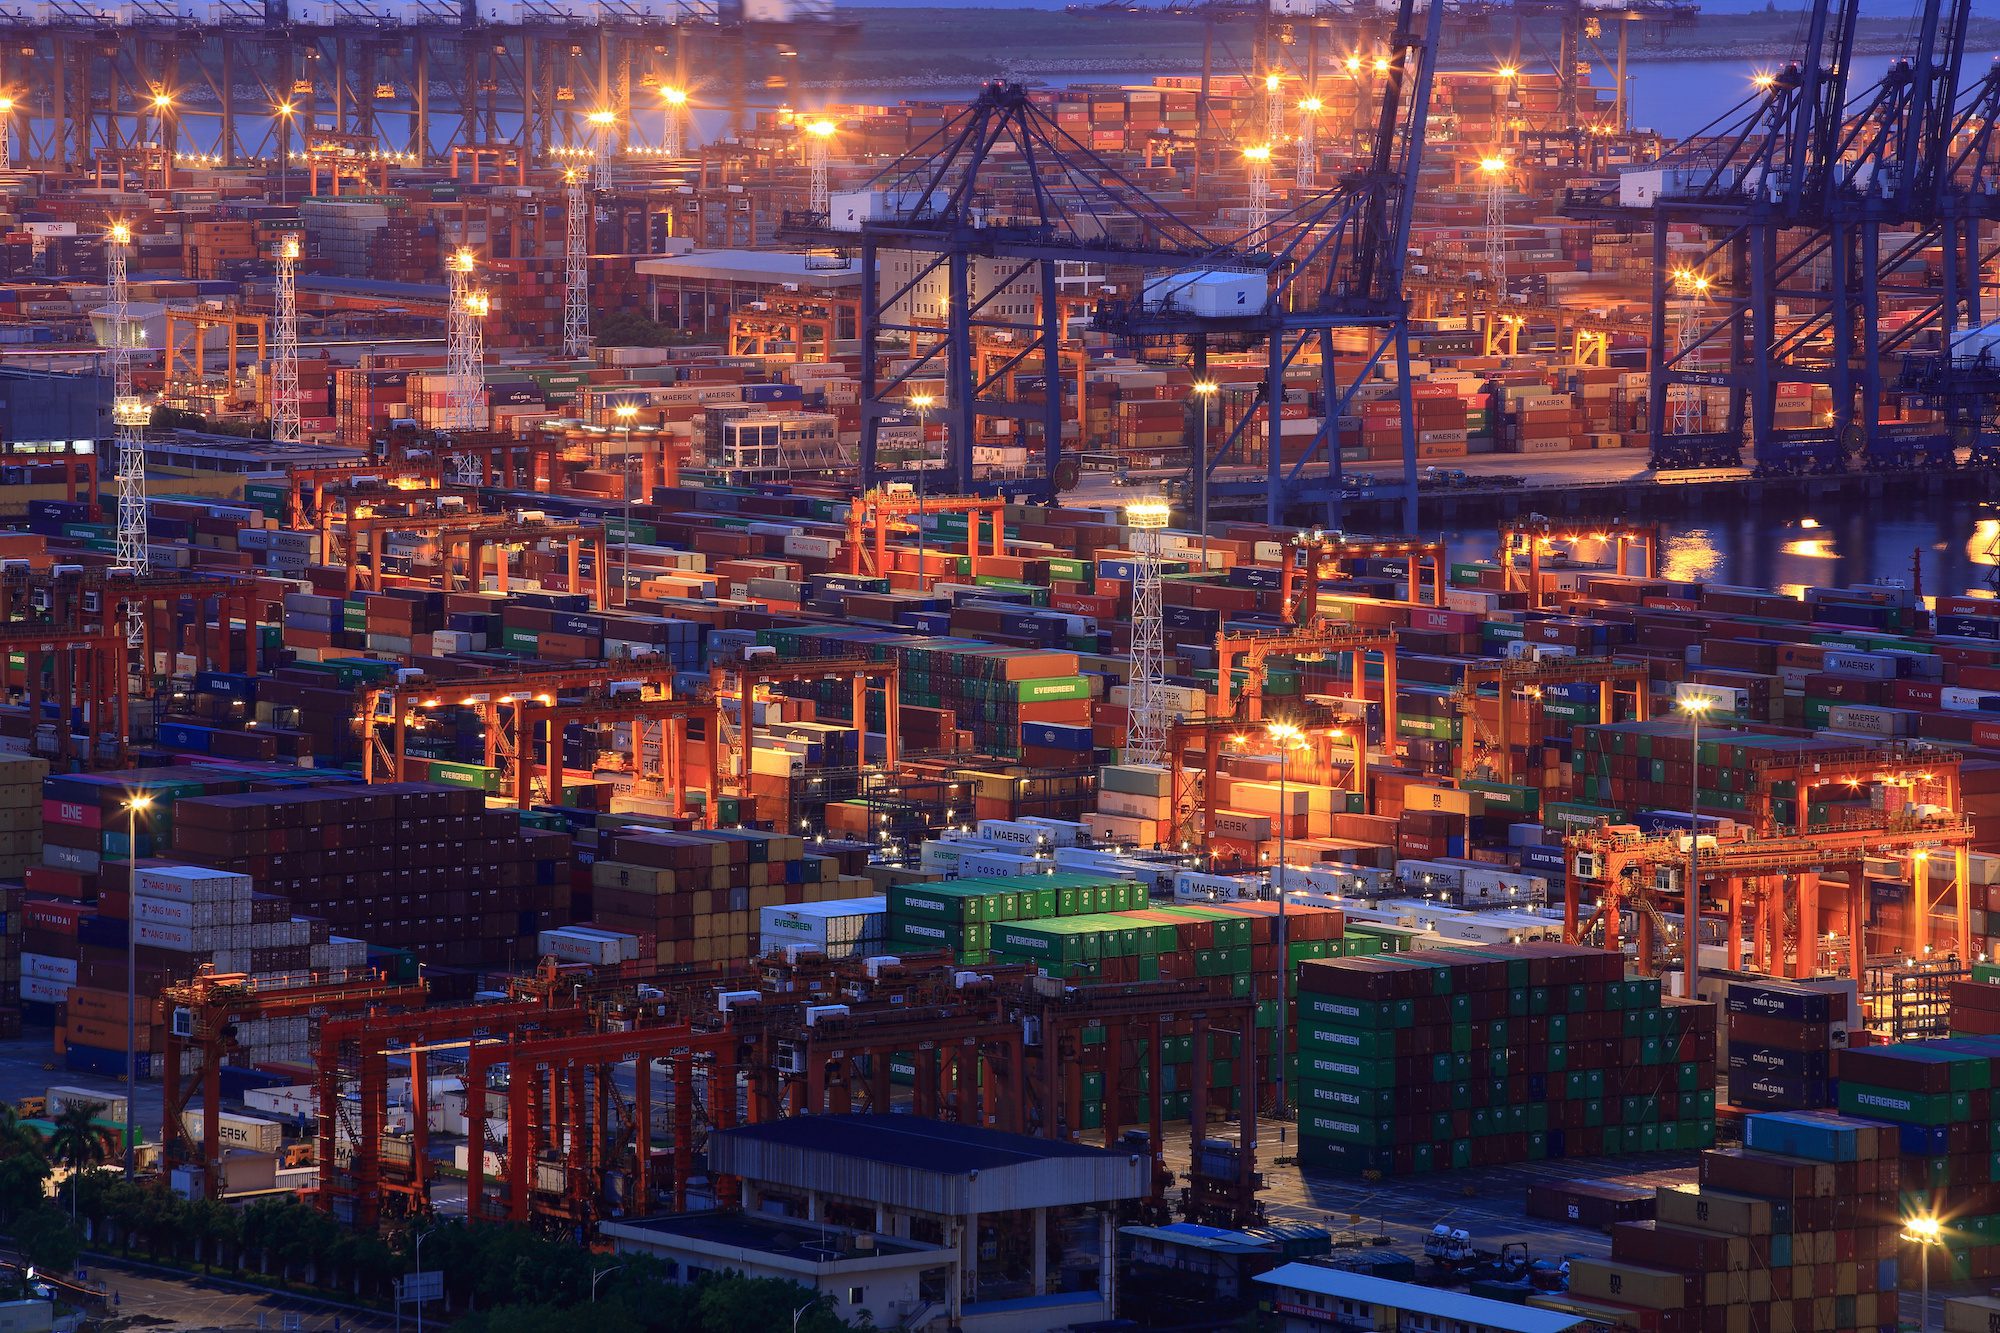 Containers are seen at Yantian port in Shenzhen, Guangdong province, China July 4, 2019. Picture taken July 4, 2019. REUTERS/Stringer